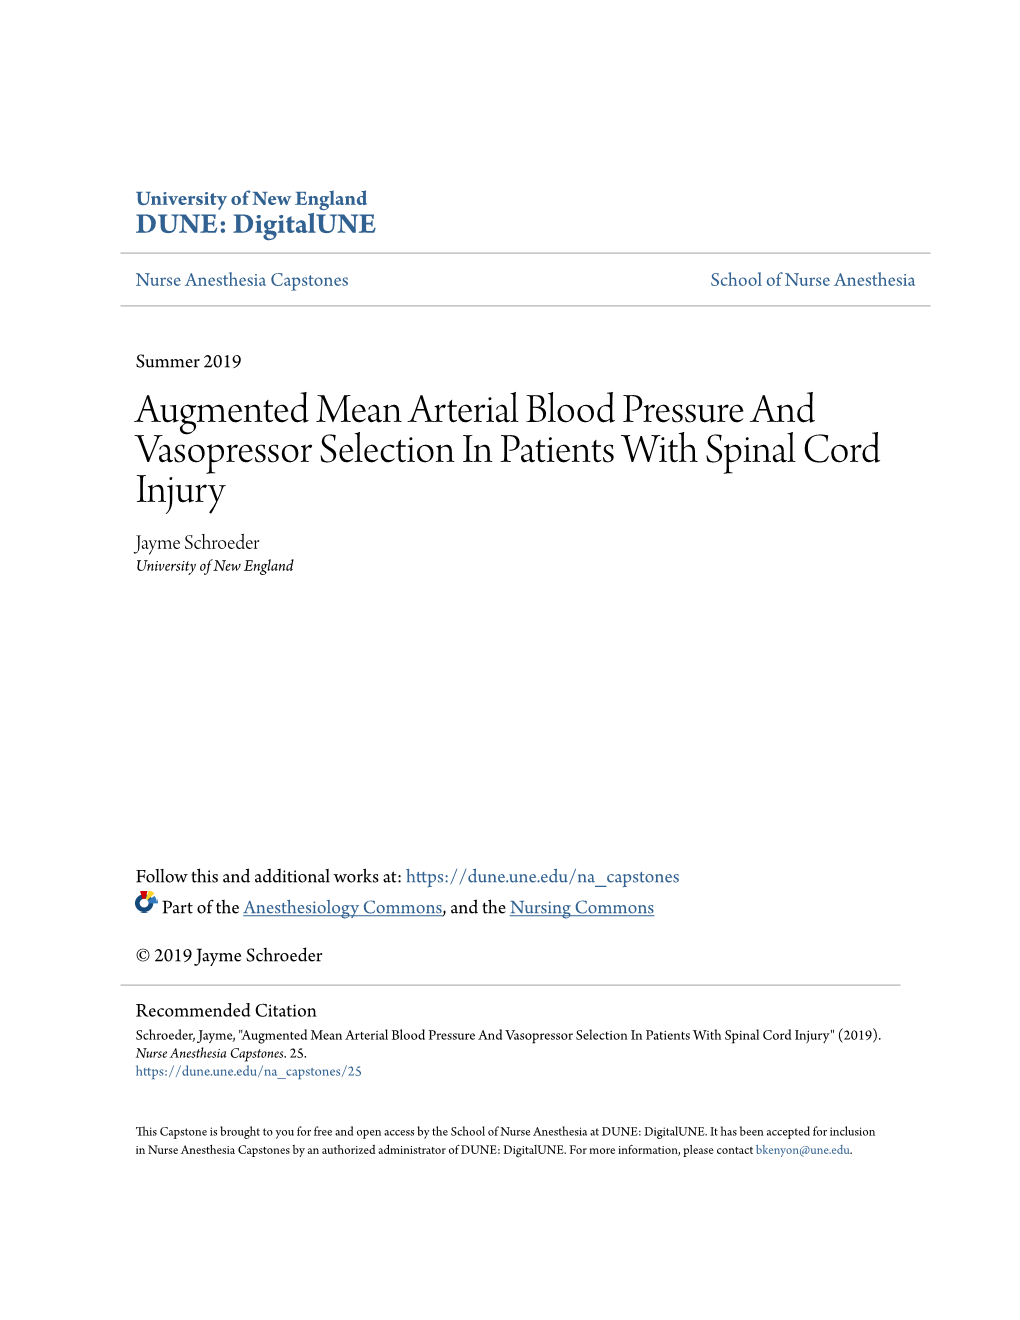 Augmented Mean Arterial Blood Pressure and Vasopressor Selection in Patients with Spinal Cord Injury Jayme Schroeder University of New England